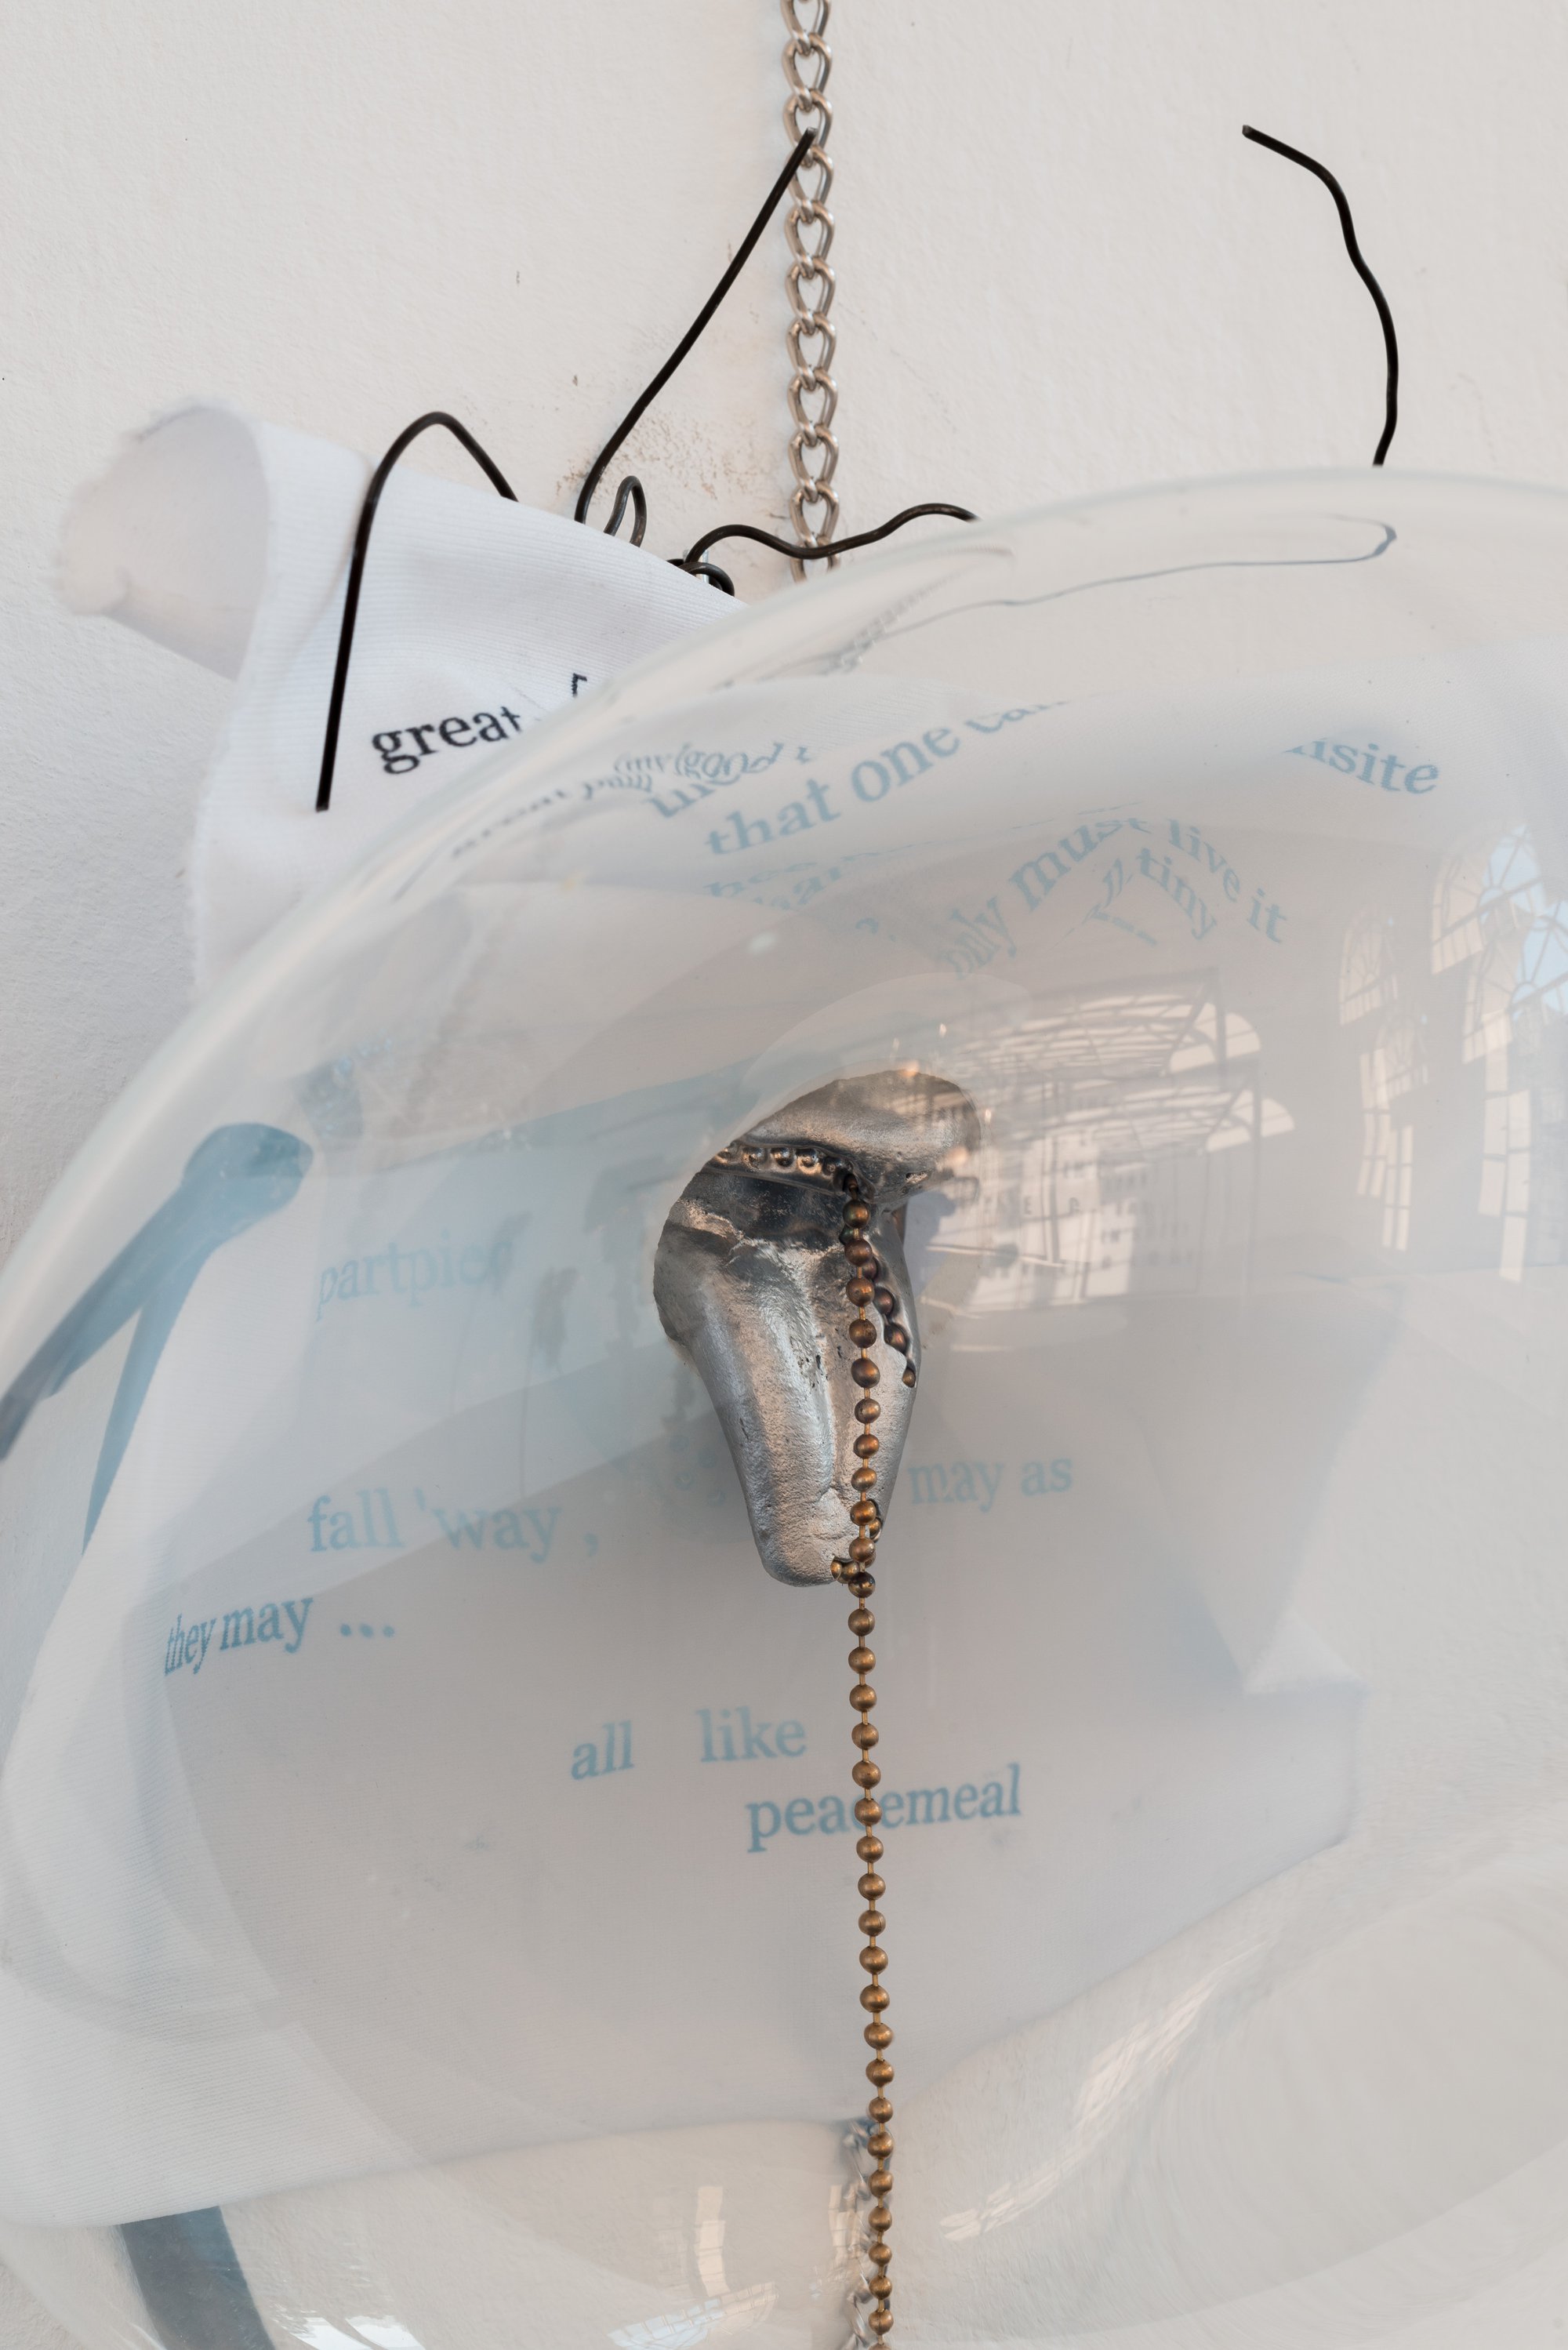 David Douard, WE, detail, glass ball, glass rod, metal chain, cooper and iron wires, printed document, aluminium, 2016